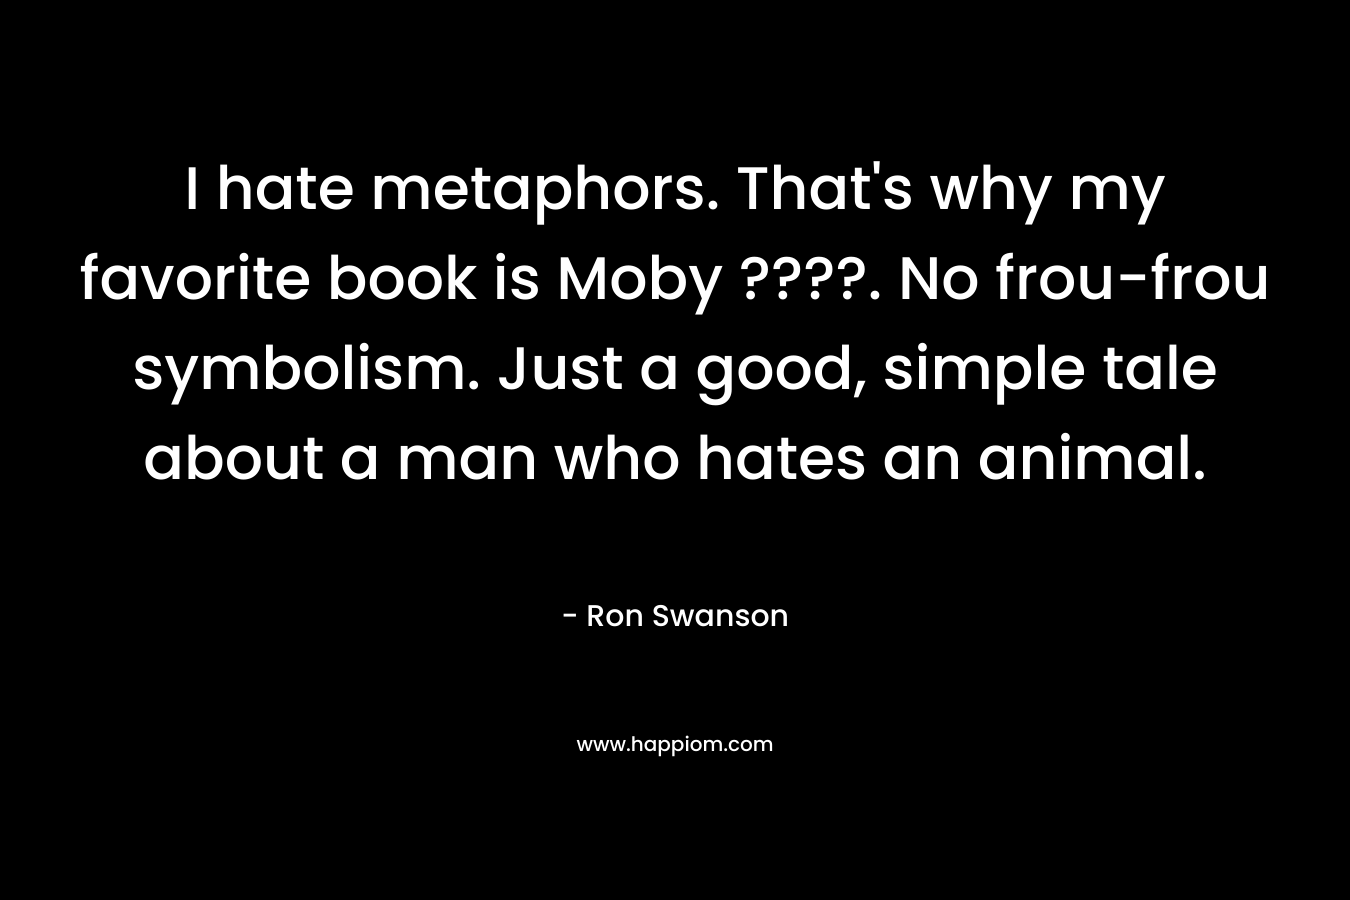 I hate metaphors. That's why my favorite book is Moby ????. No frou-frou symbolism. Just a good, simple tale about a man who hates an animal.